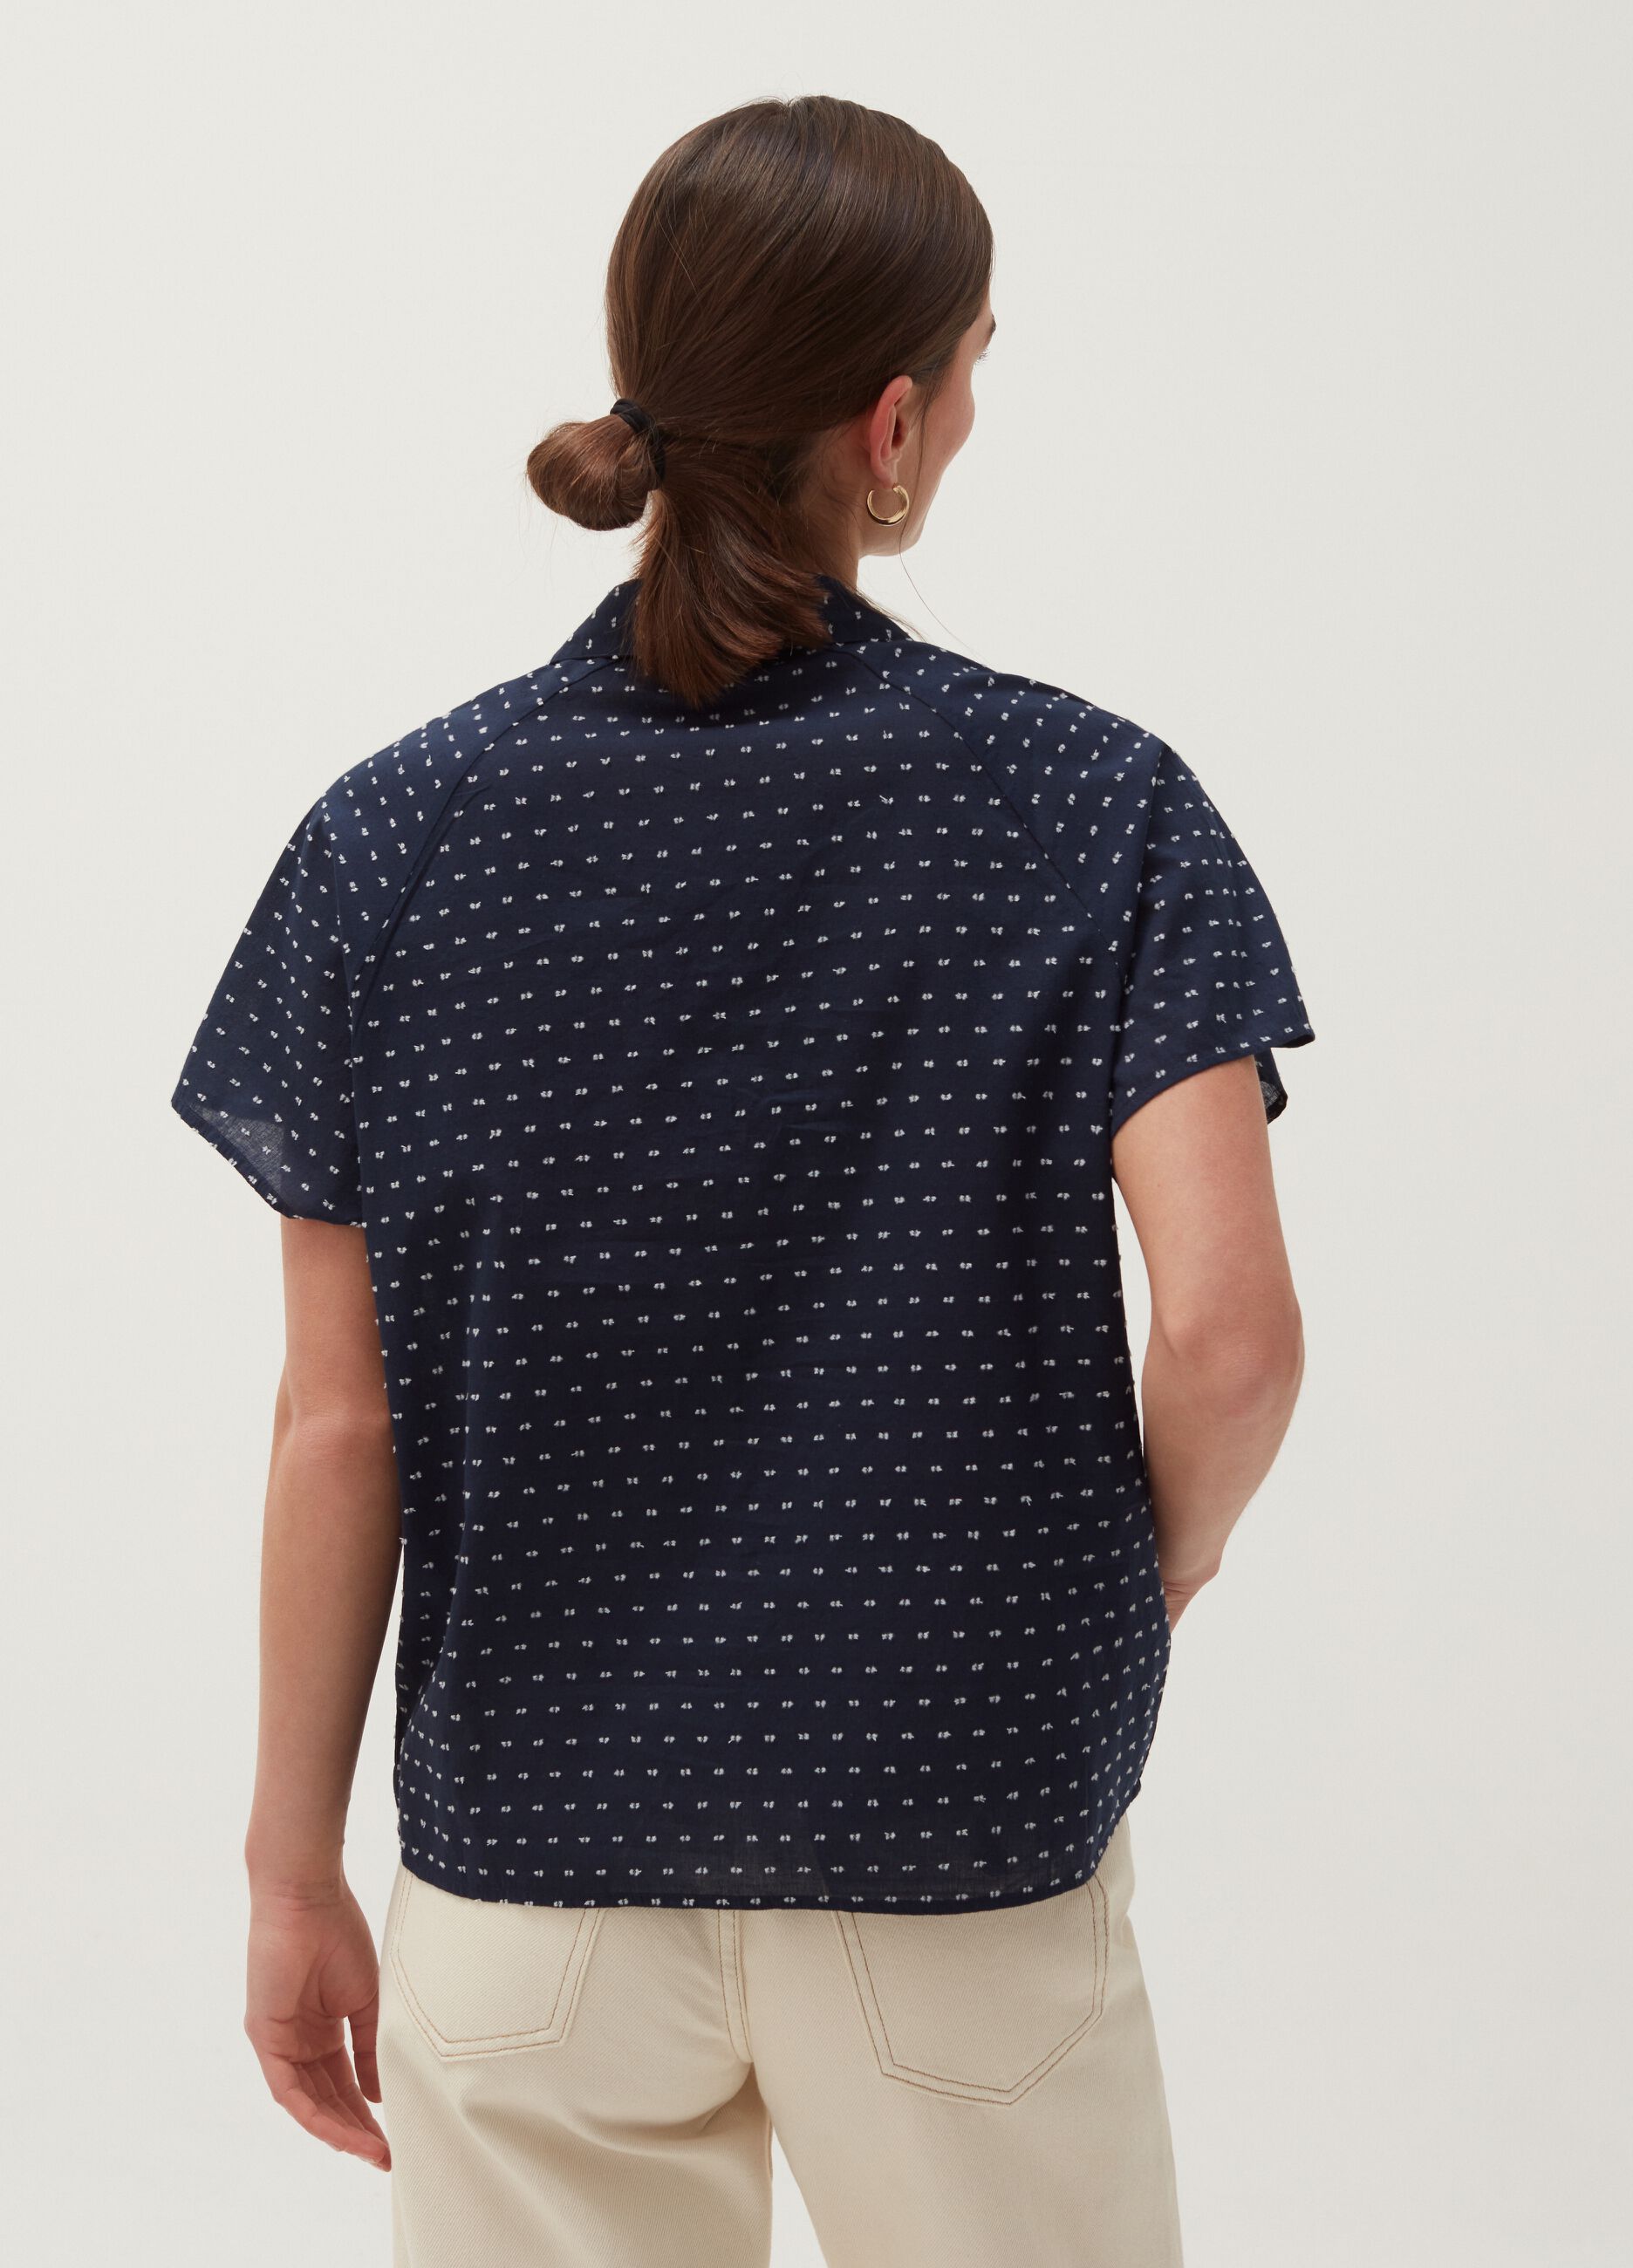 Short-sleeved blouse in cotton